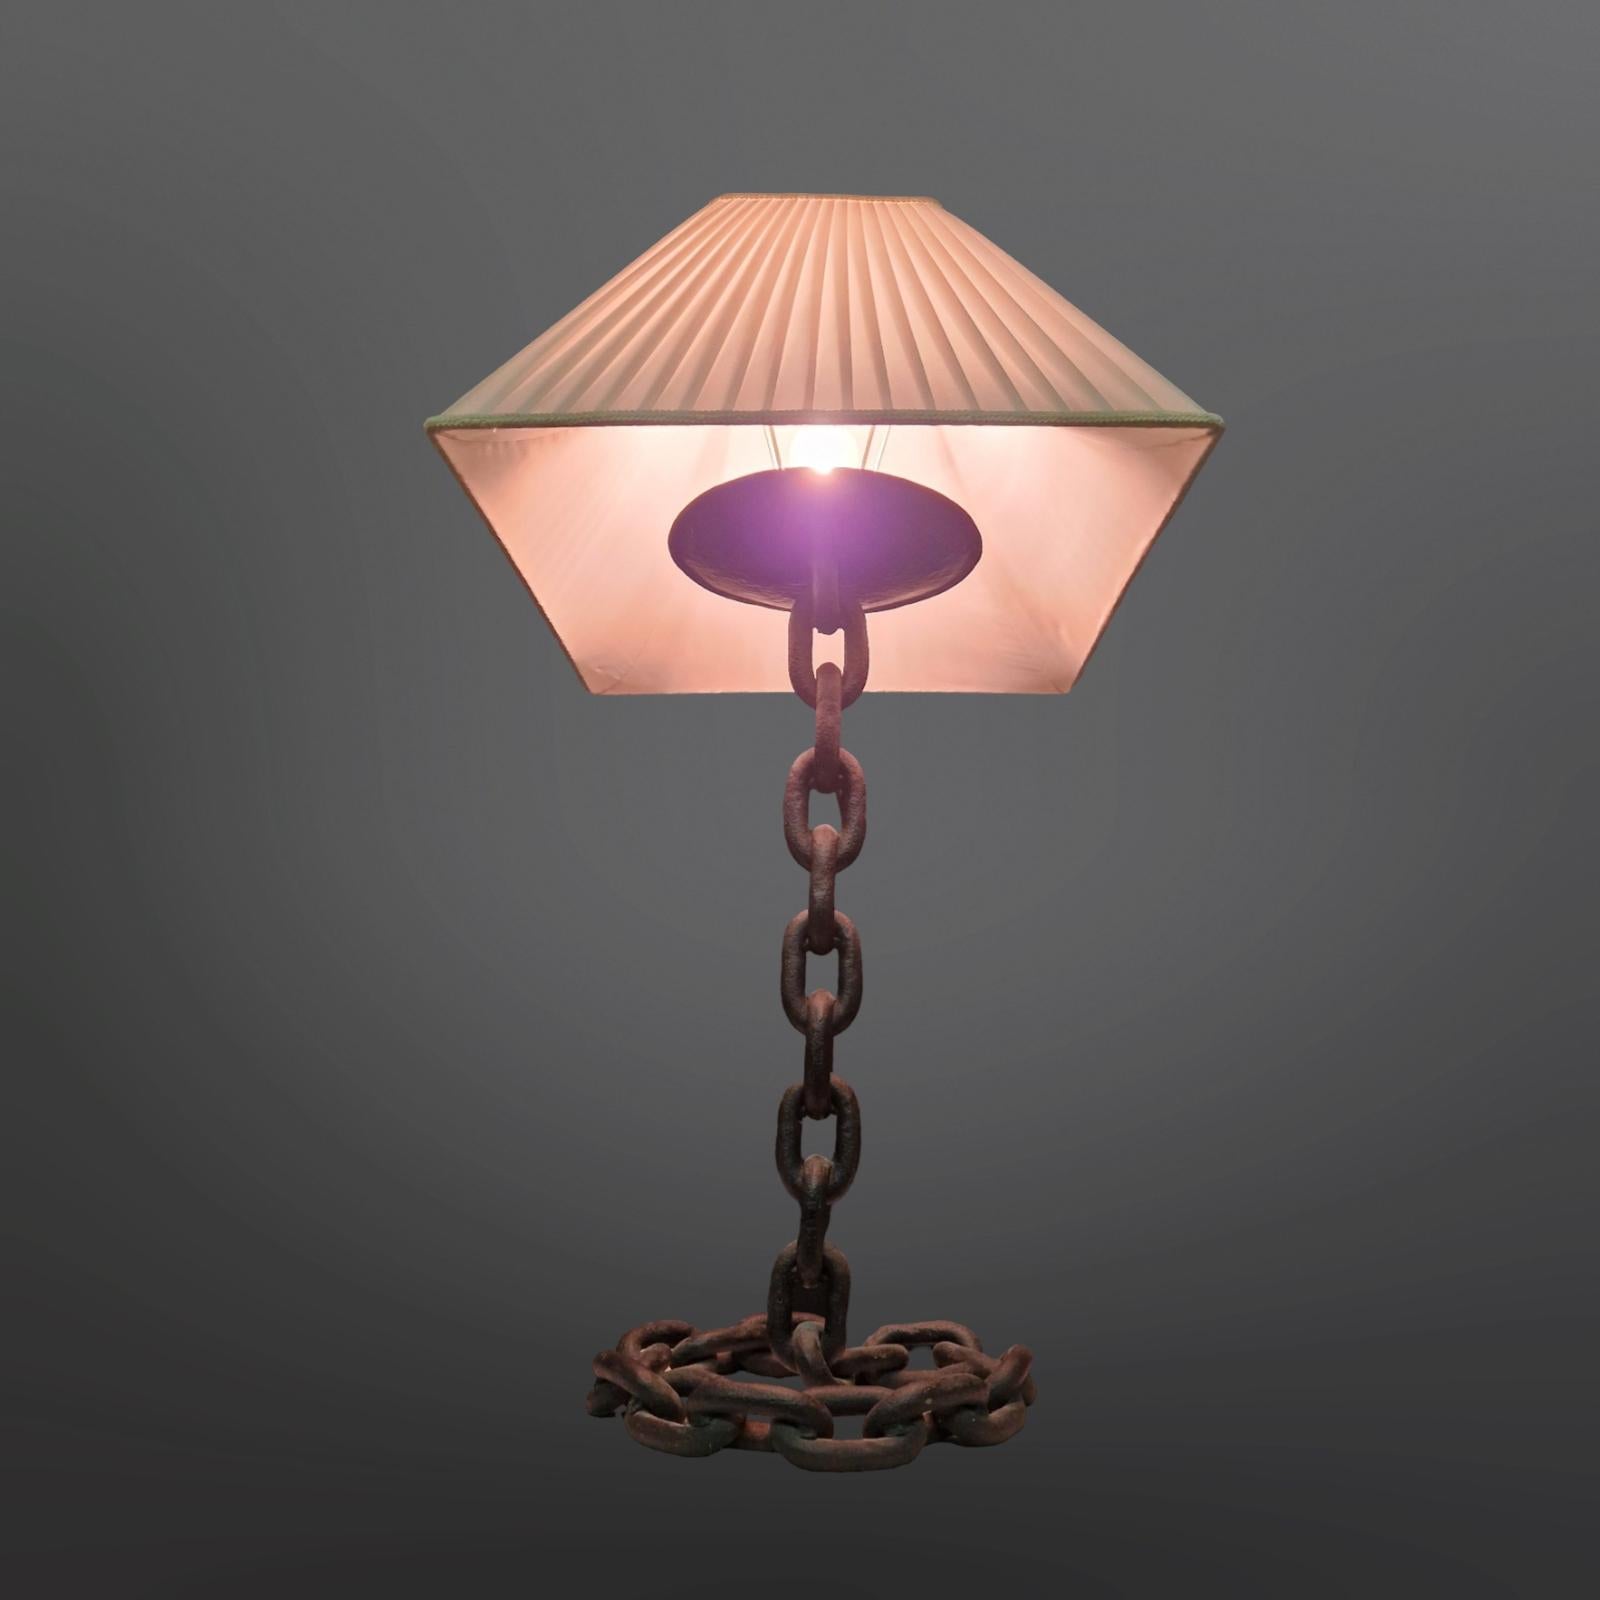 Large brutalist style table lamp. Made from a heavy iron chain. The links have been welded to each other creating the illusion that it is defying gravity. Made in France somewhere in the 1960s. 
The lamp is sold without the shade shown on the